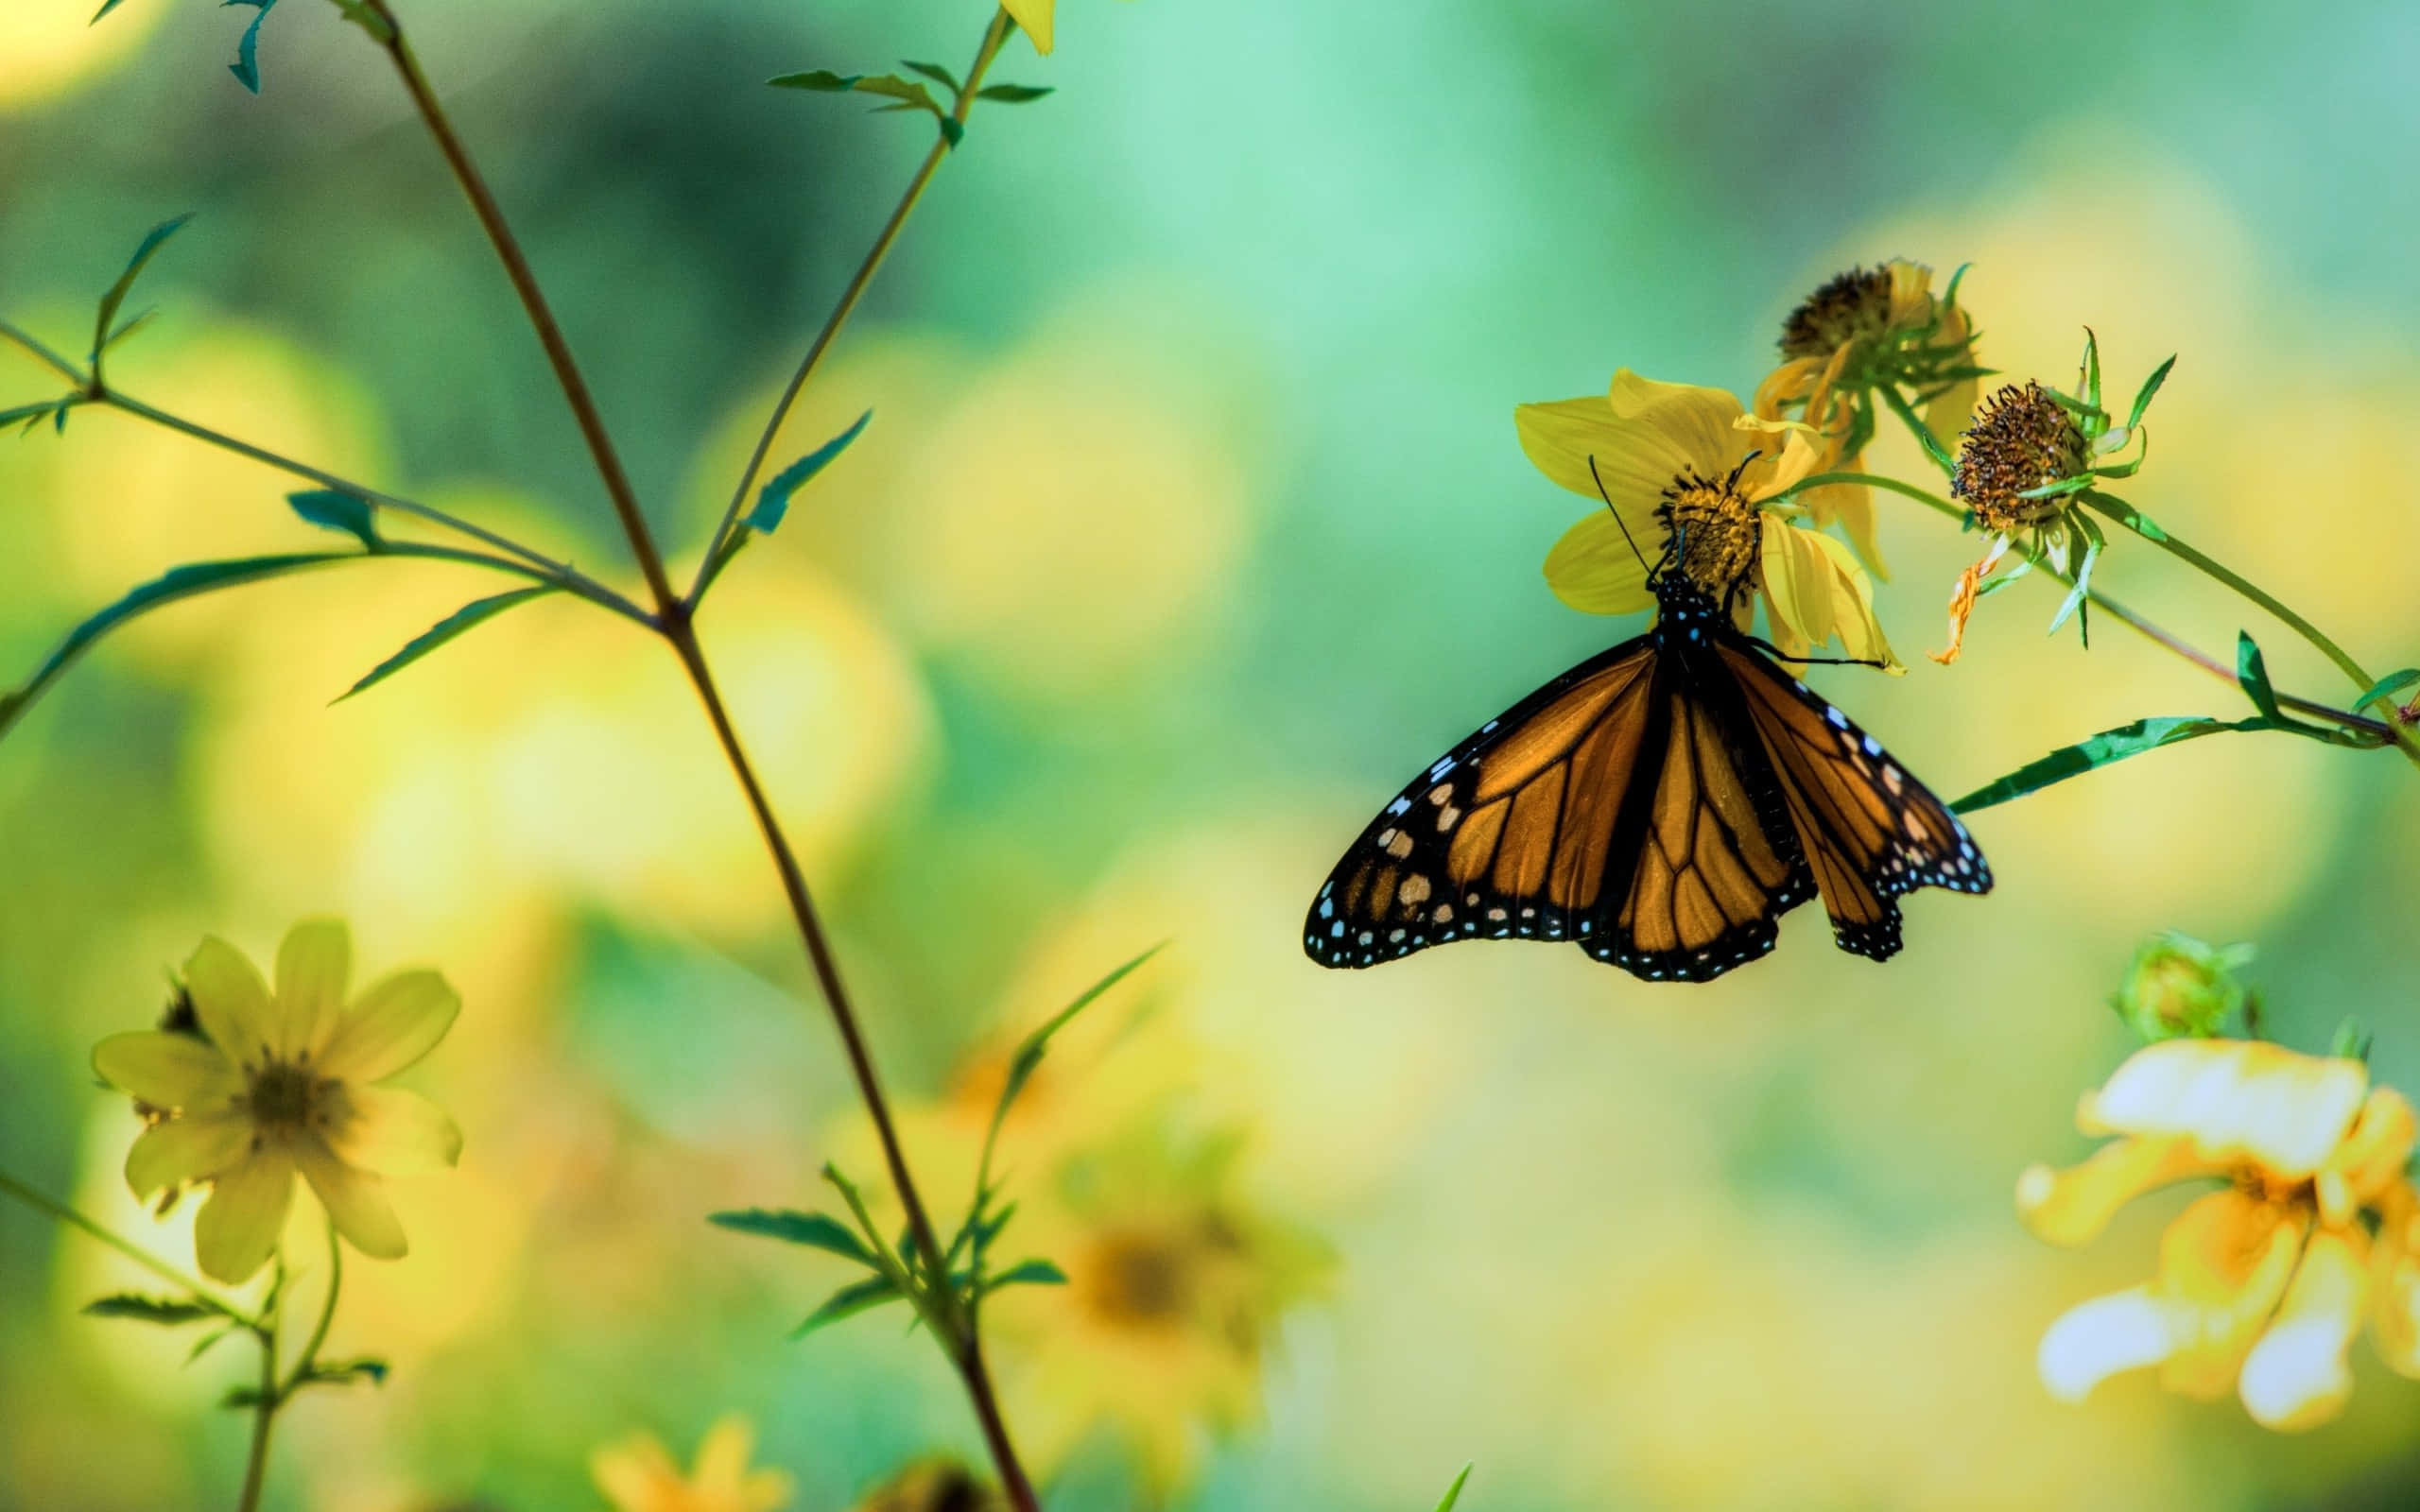 A colorful butterfly fluttering above a garden of vibrant plants. Wallpaper